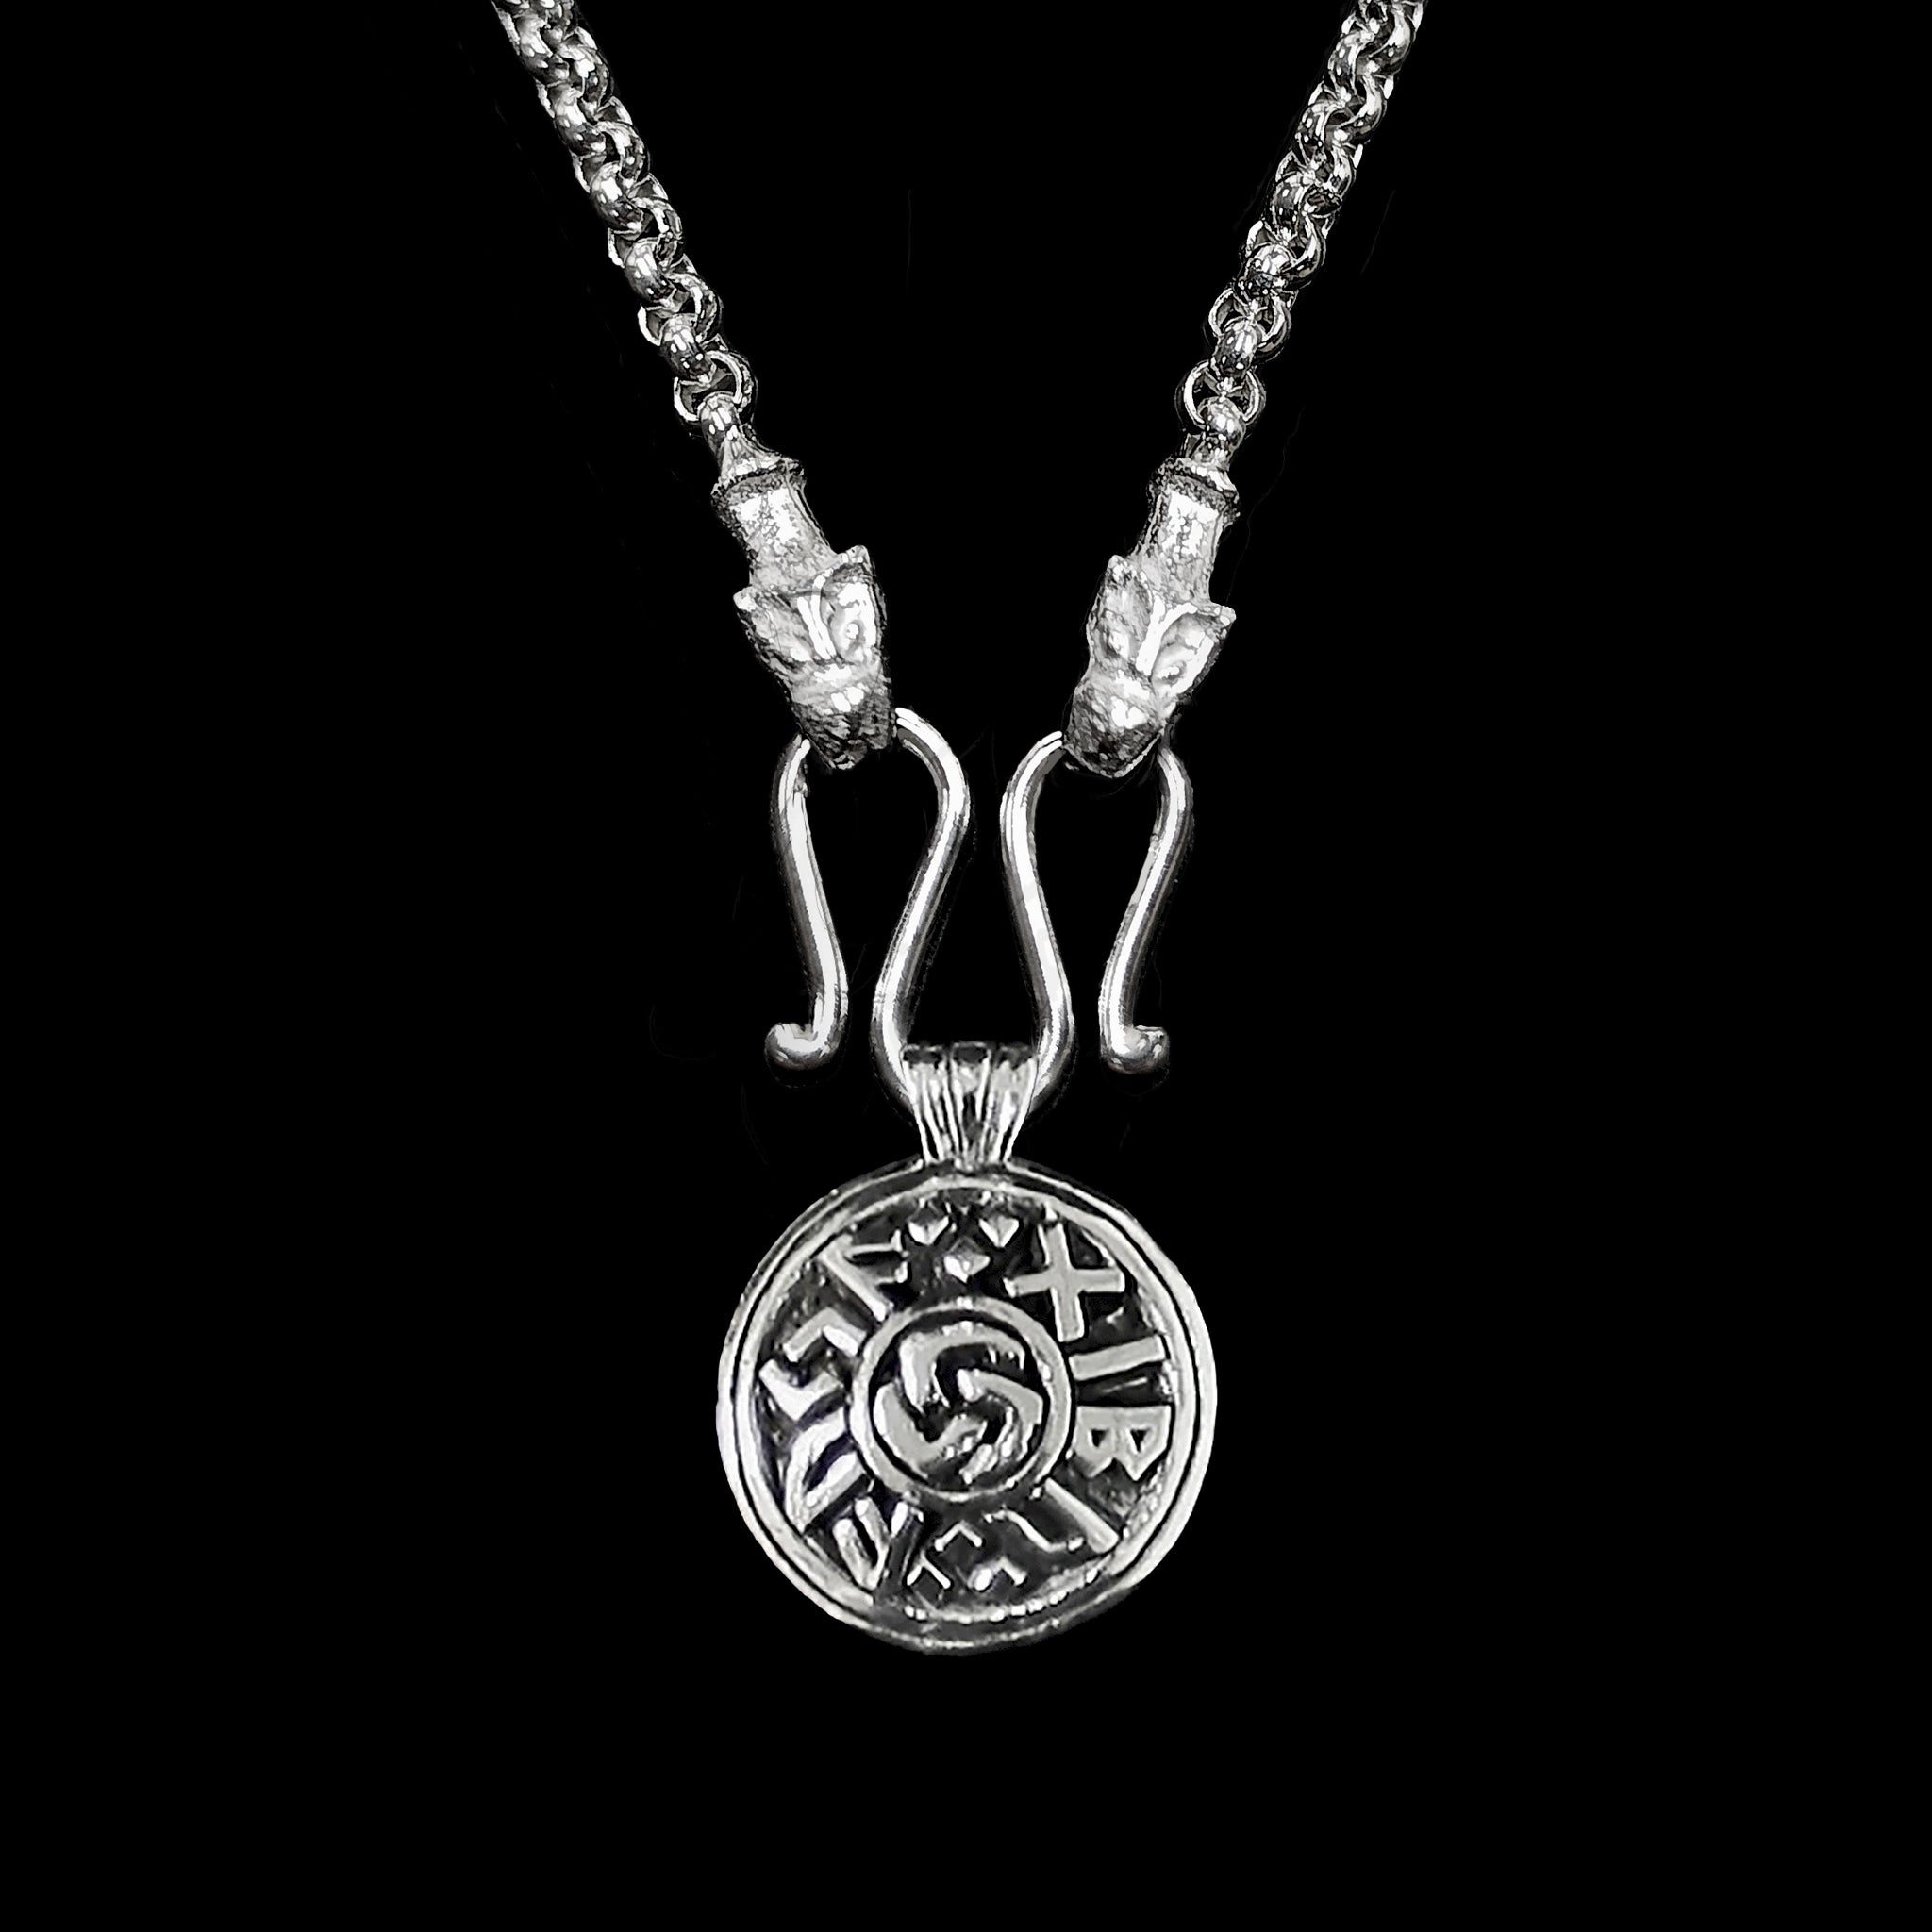 Slim Silver Anchor Chain Pendant Necklace with Icelandic Wolf Heads with Good Luck Viking Pendant